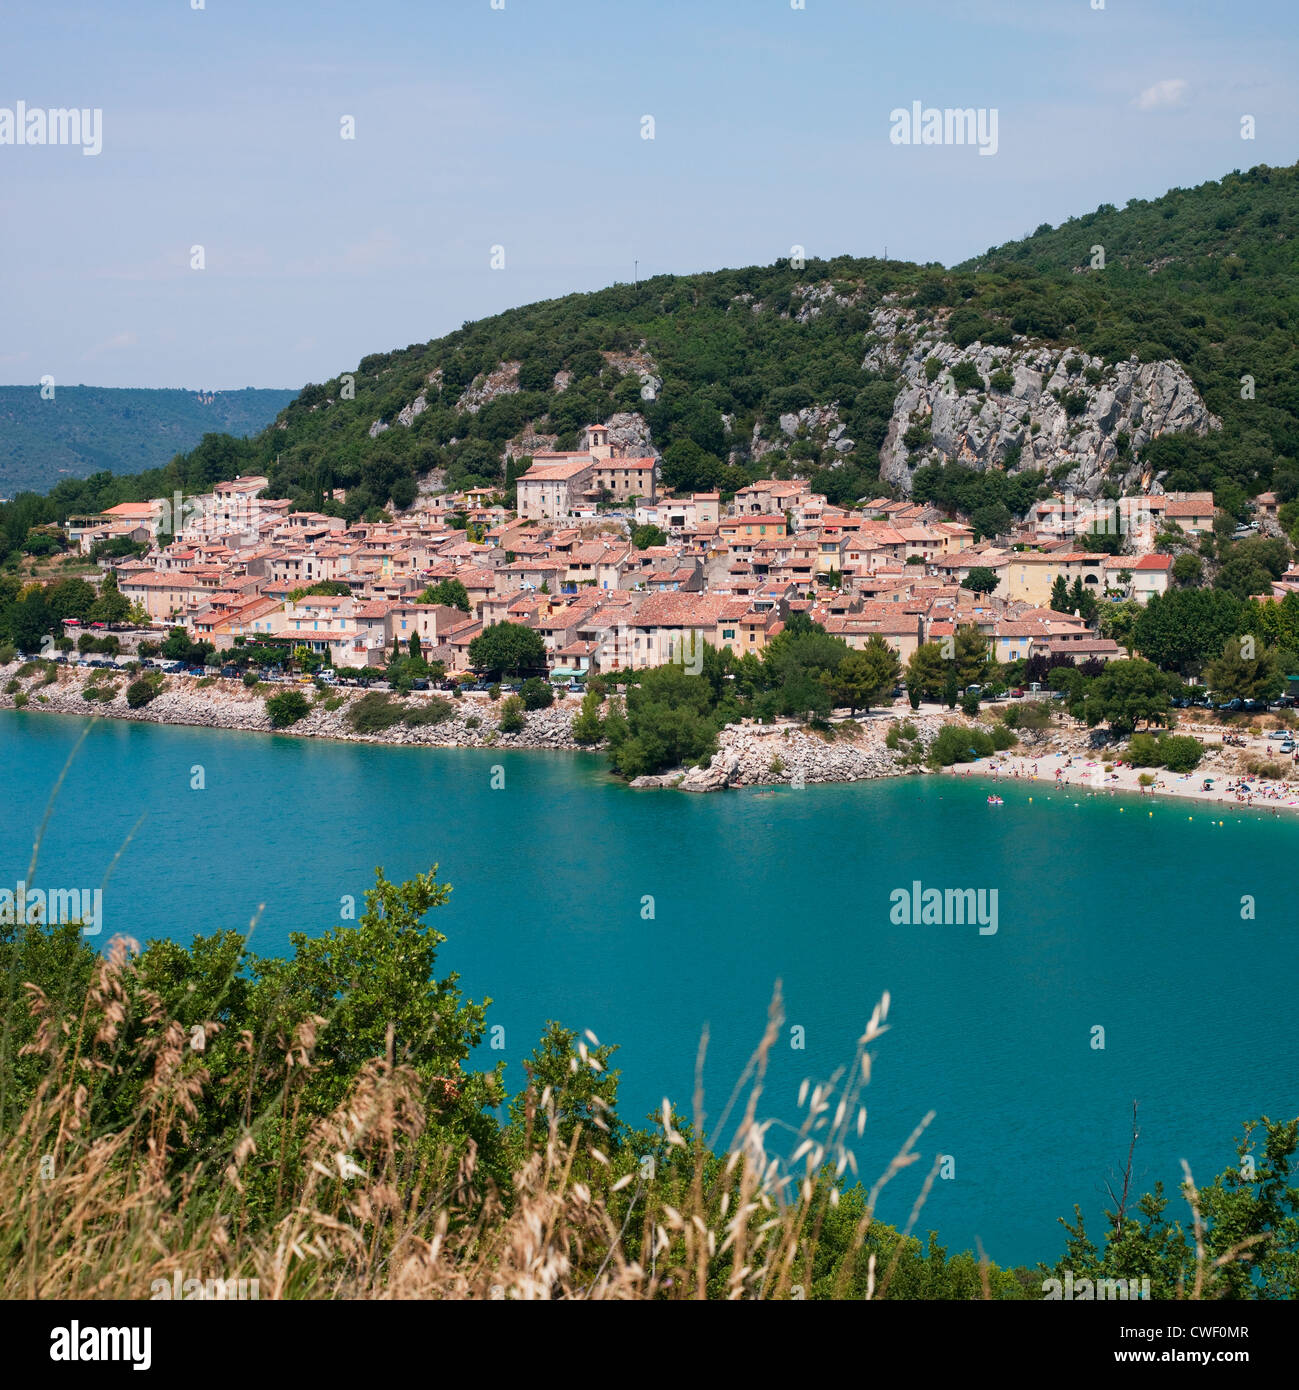 The traditional Provence village of Bauduen on a hillside overlooking the Lac de Sainte Croix in southern France Stock Photo